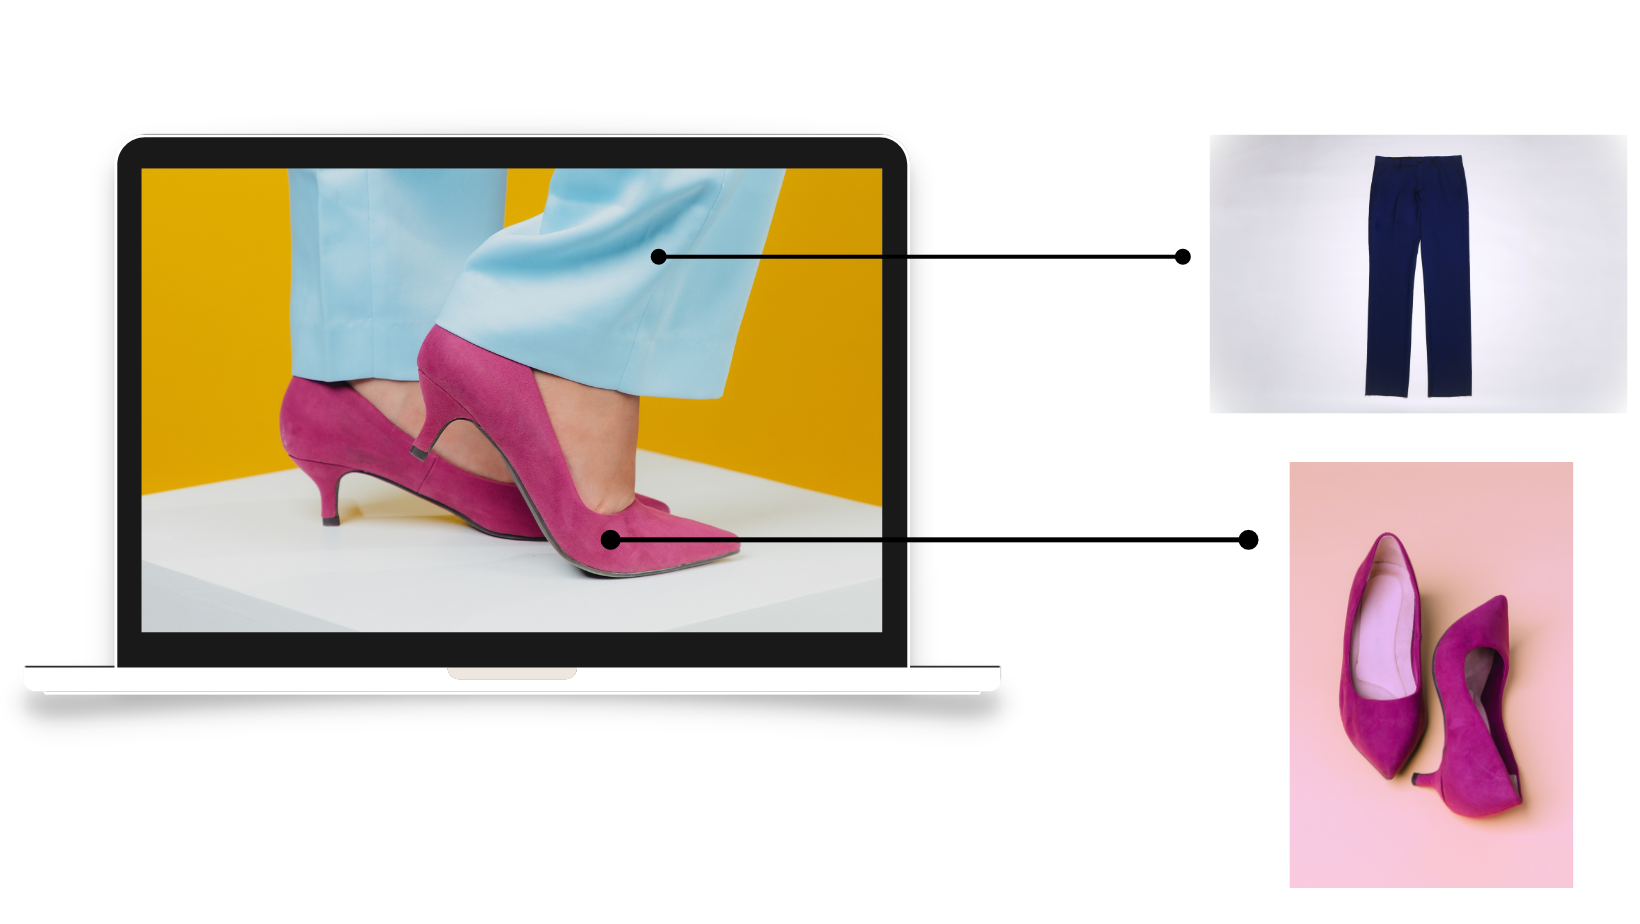 Image showing a trouser and heels (shoes) with AI selected
								simialr images on the right